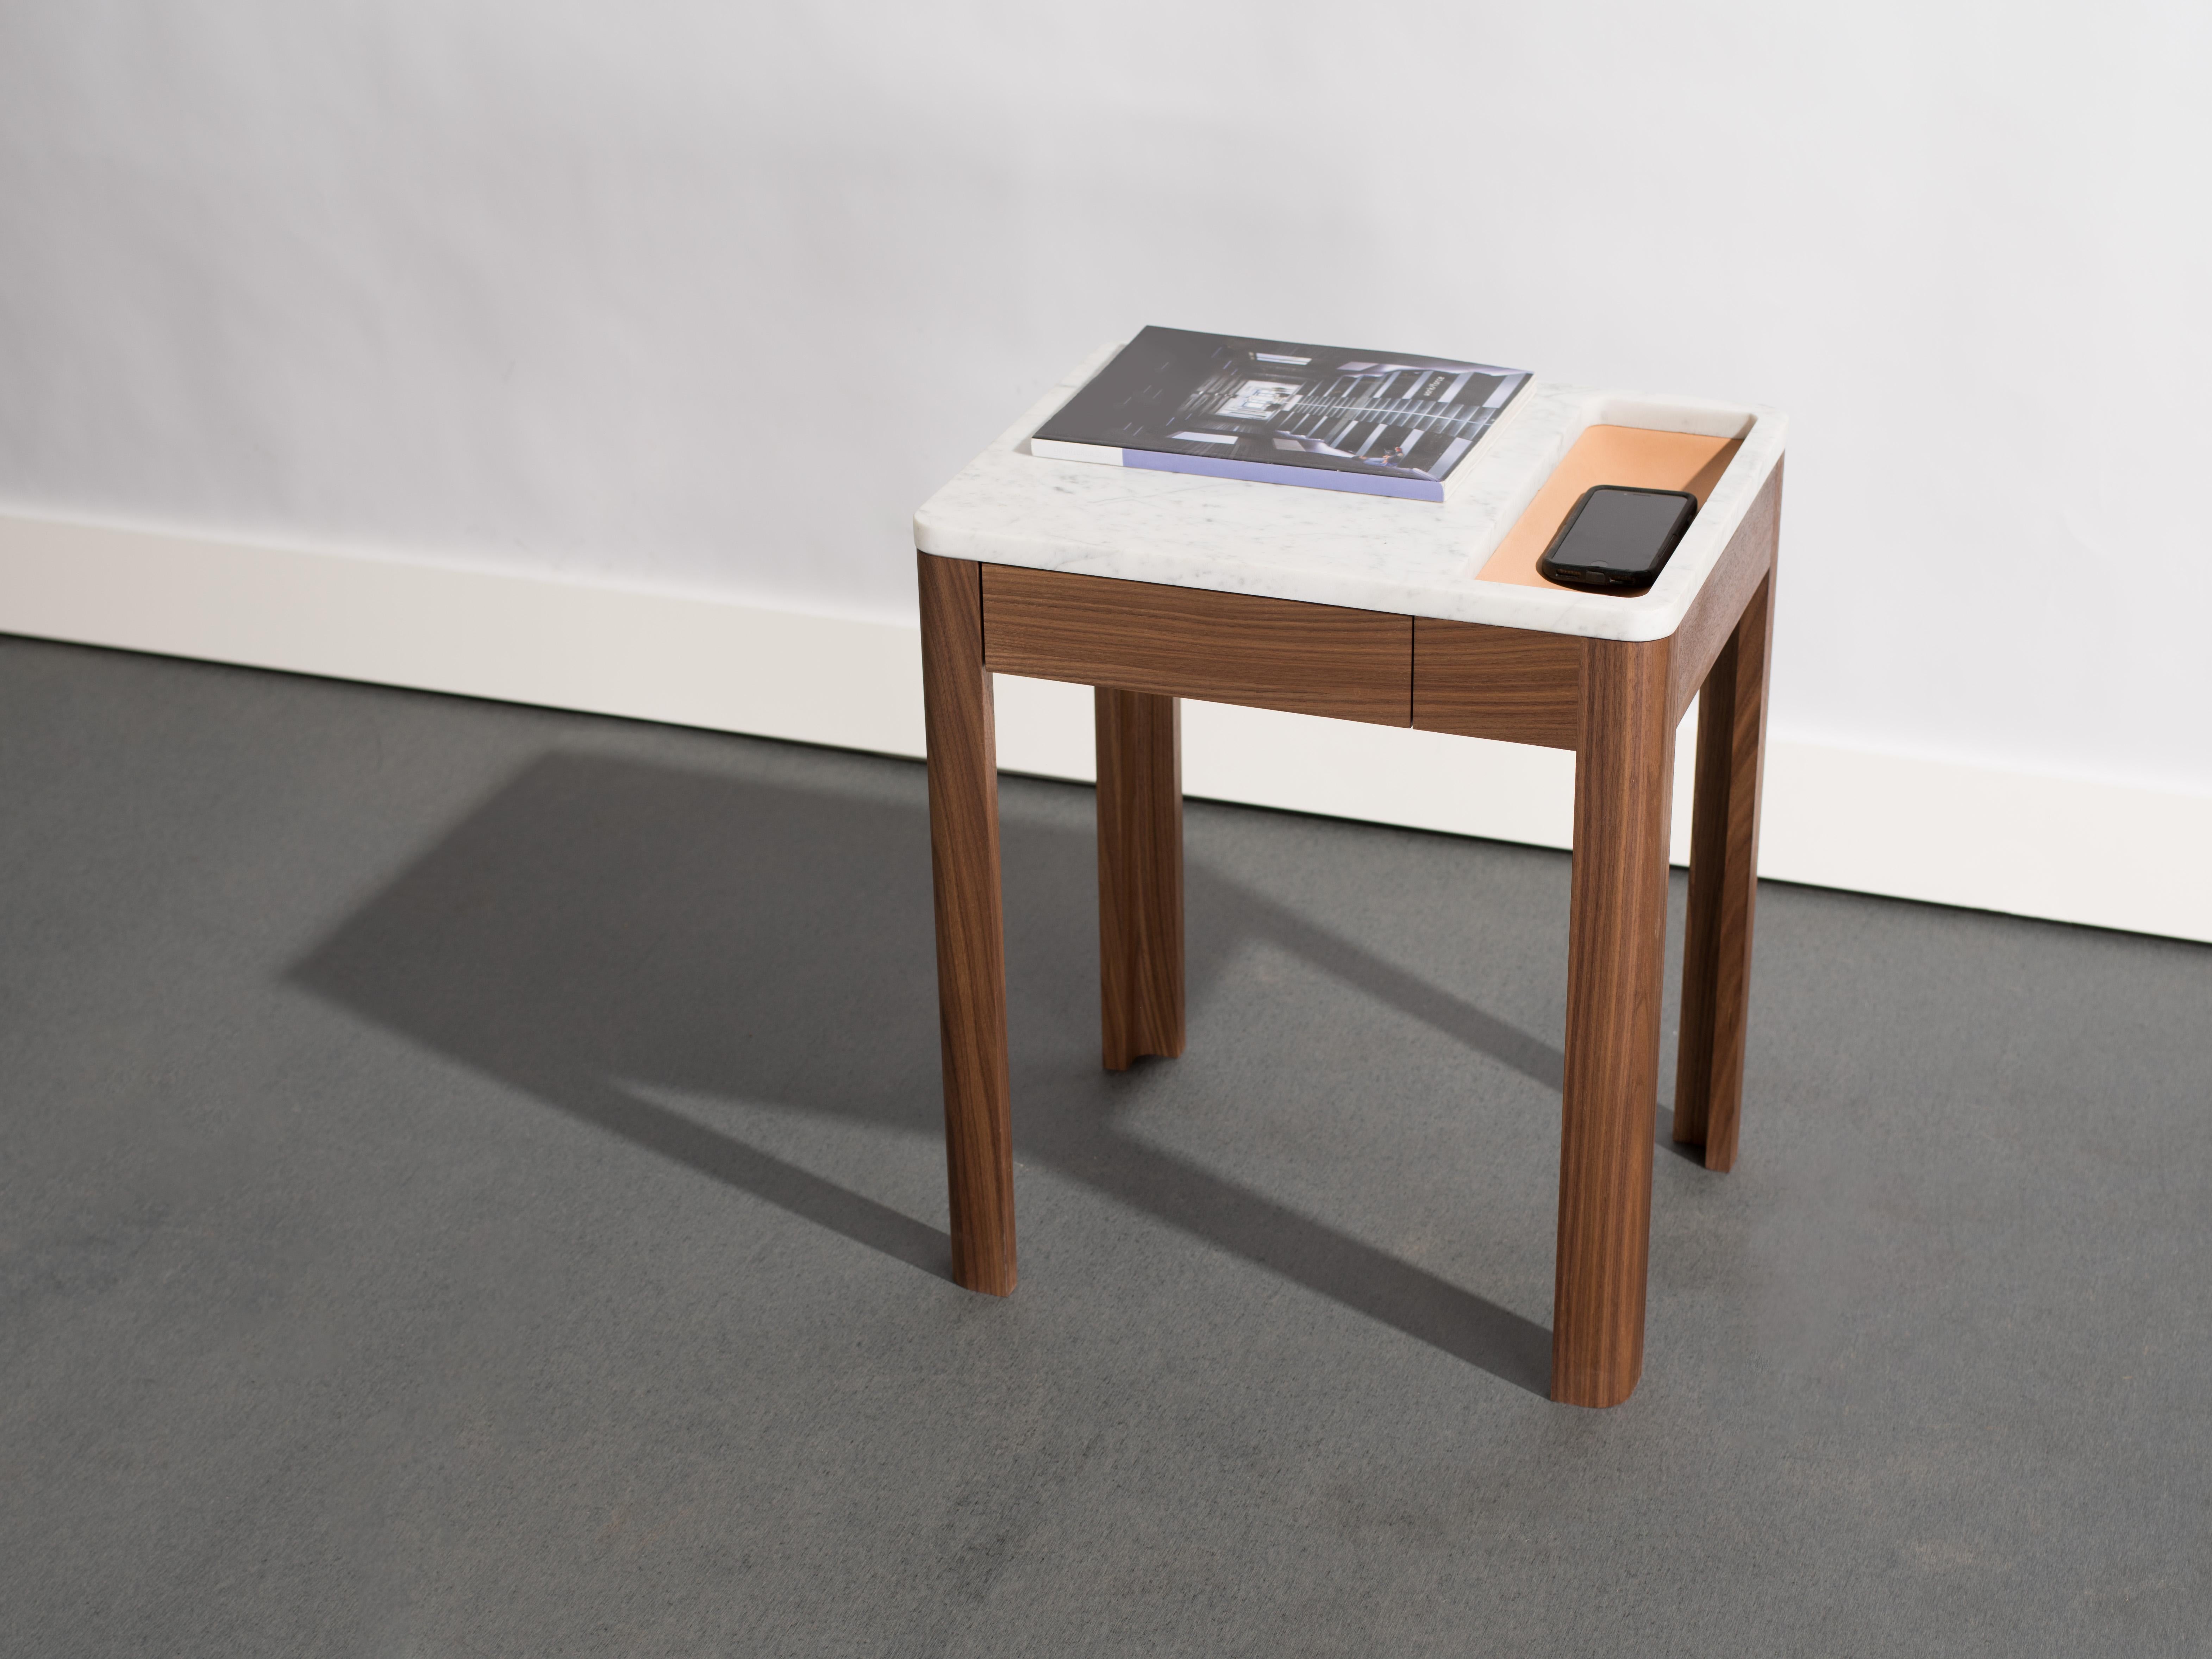 Contemporary Void Side Table in White Oak, Carrara Marble, and Leather by Harold (amerikanisch) im Angebot